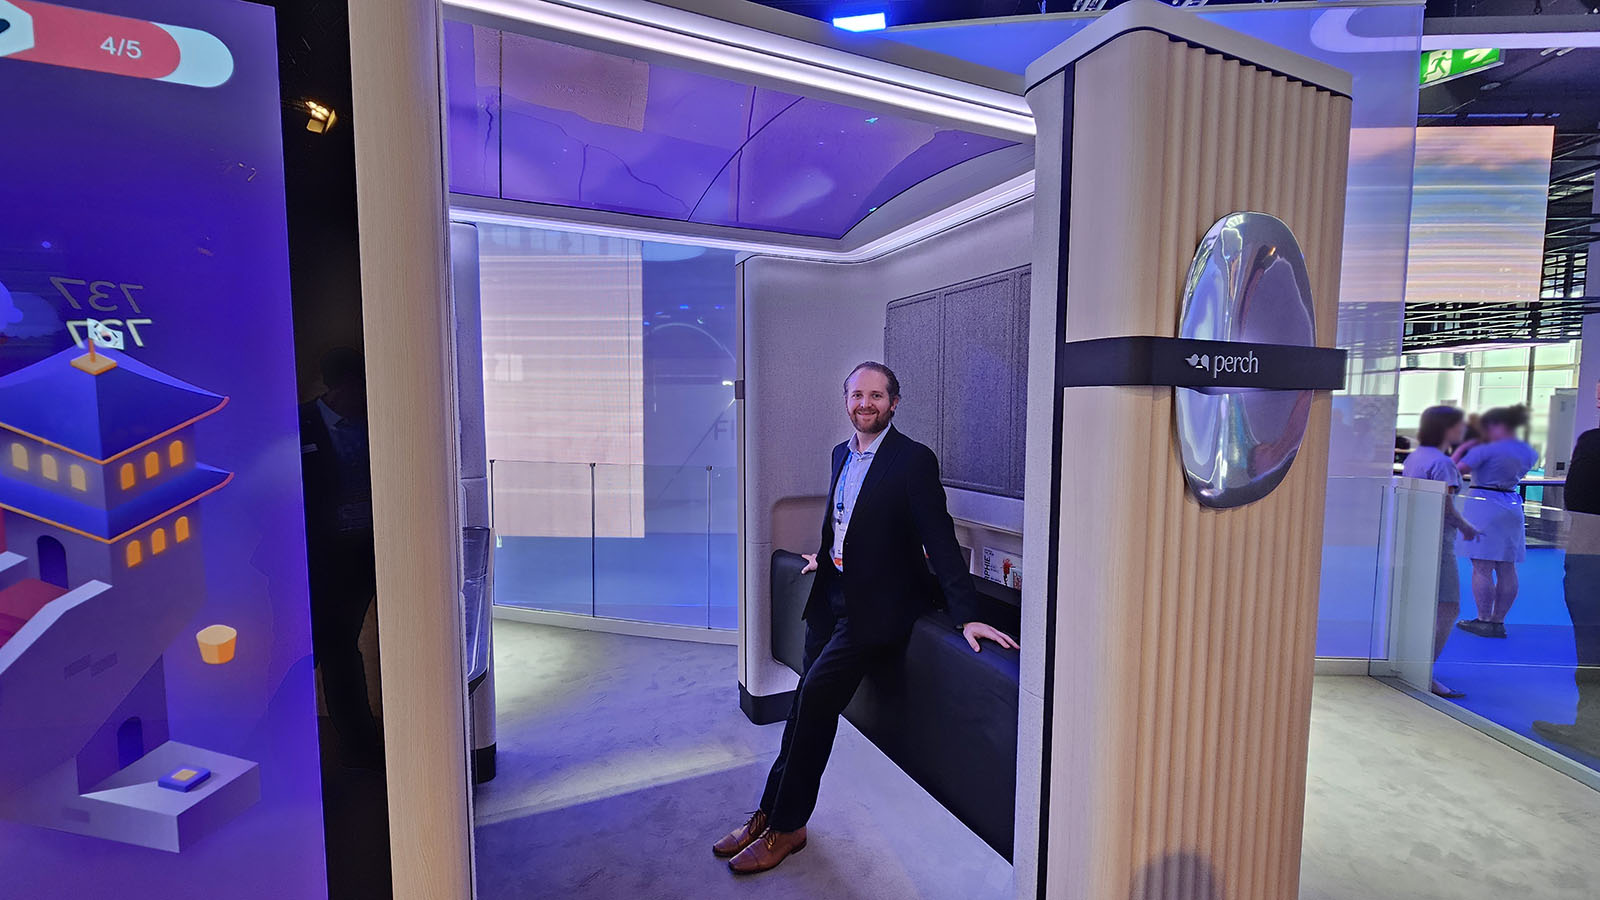 Chris Chamberlin explores Boeing's Perch concept